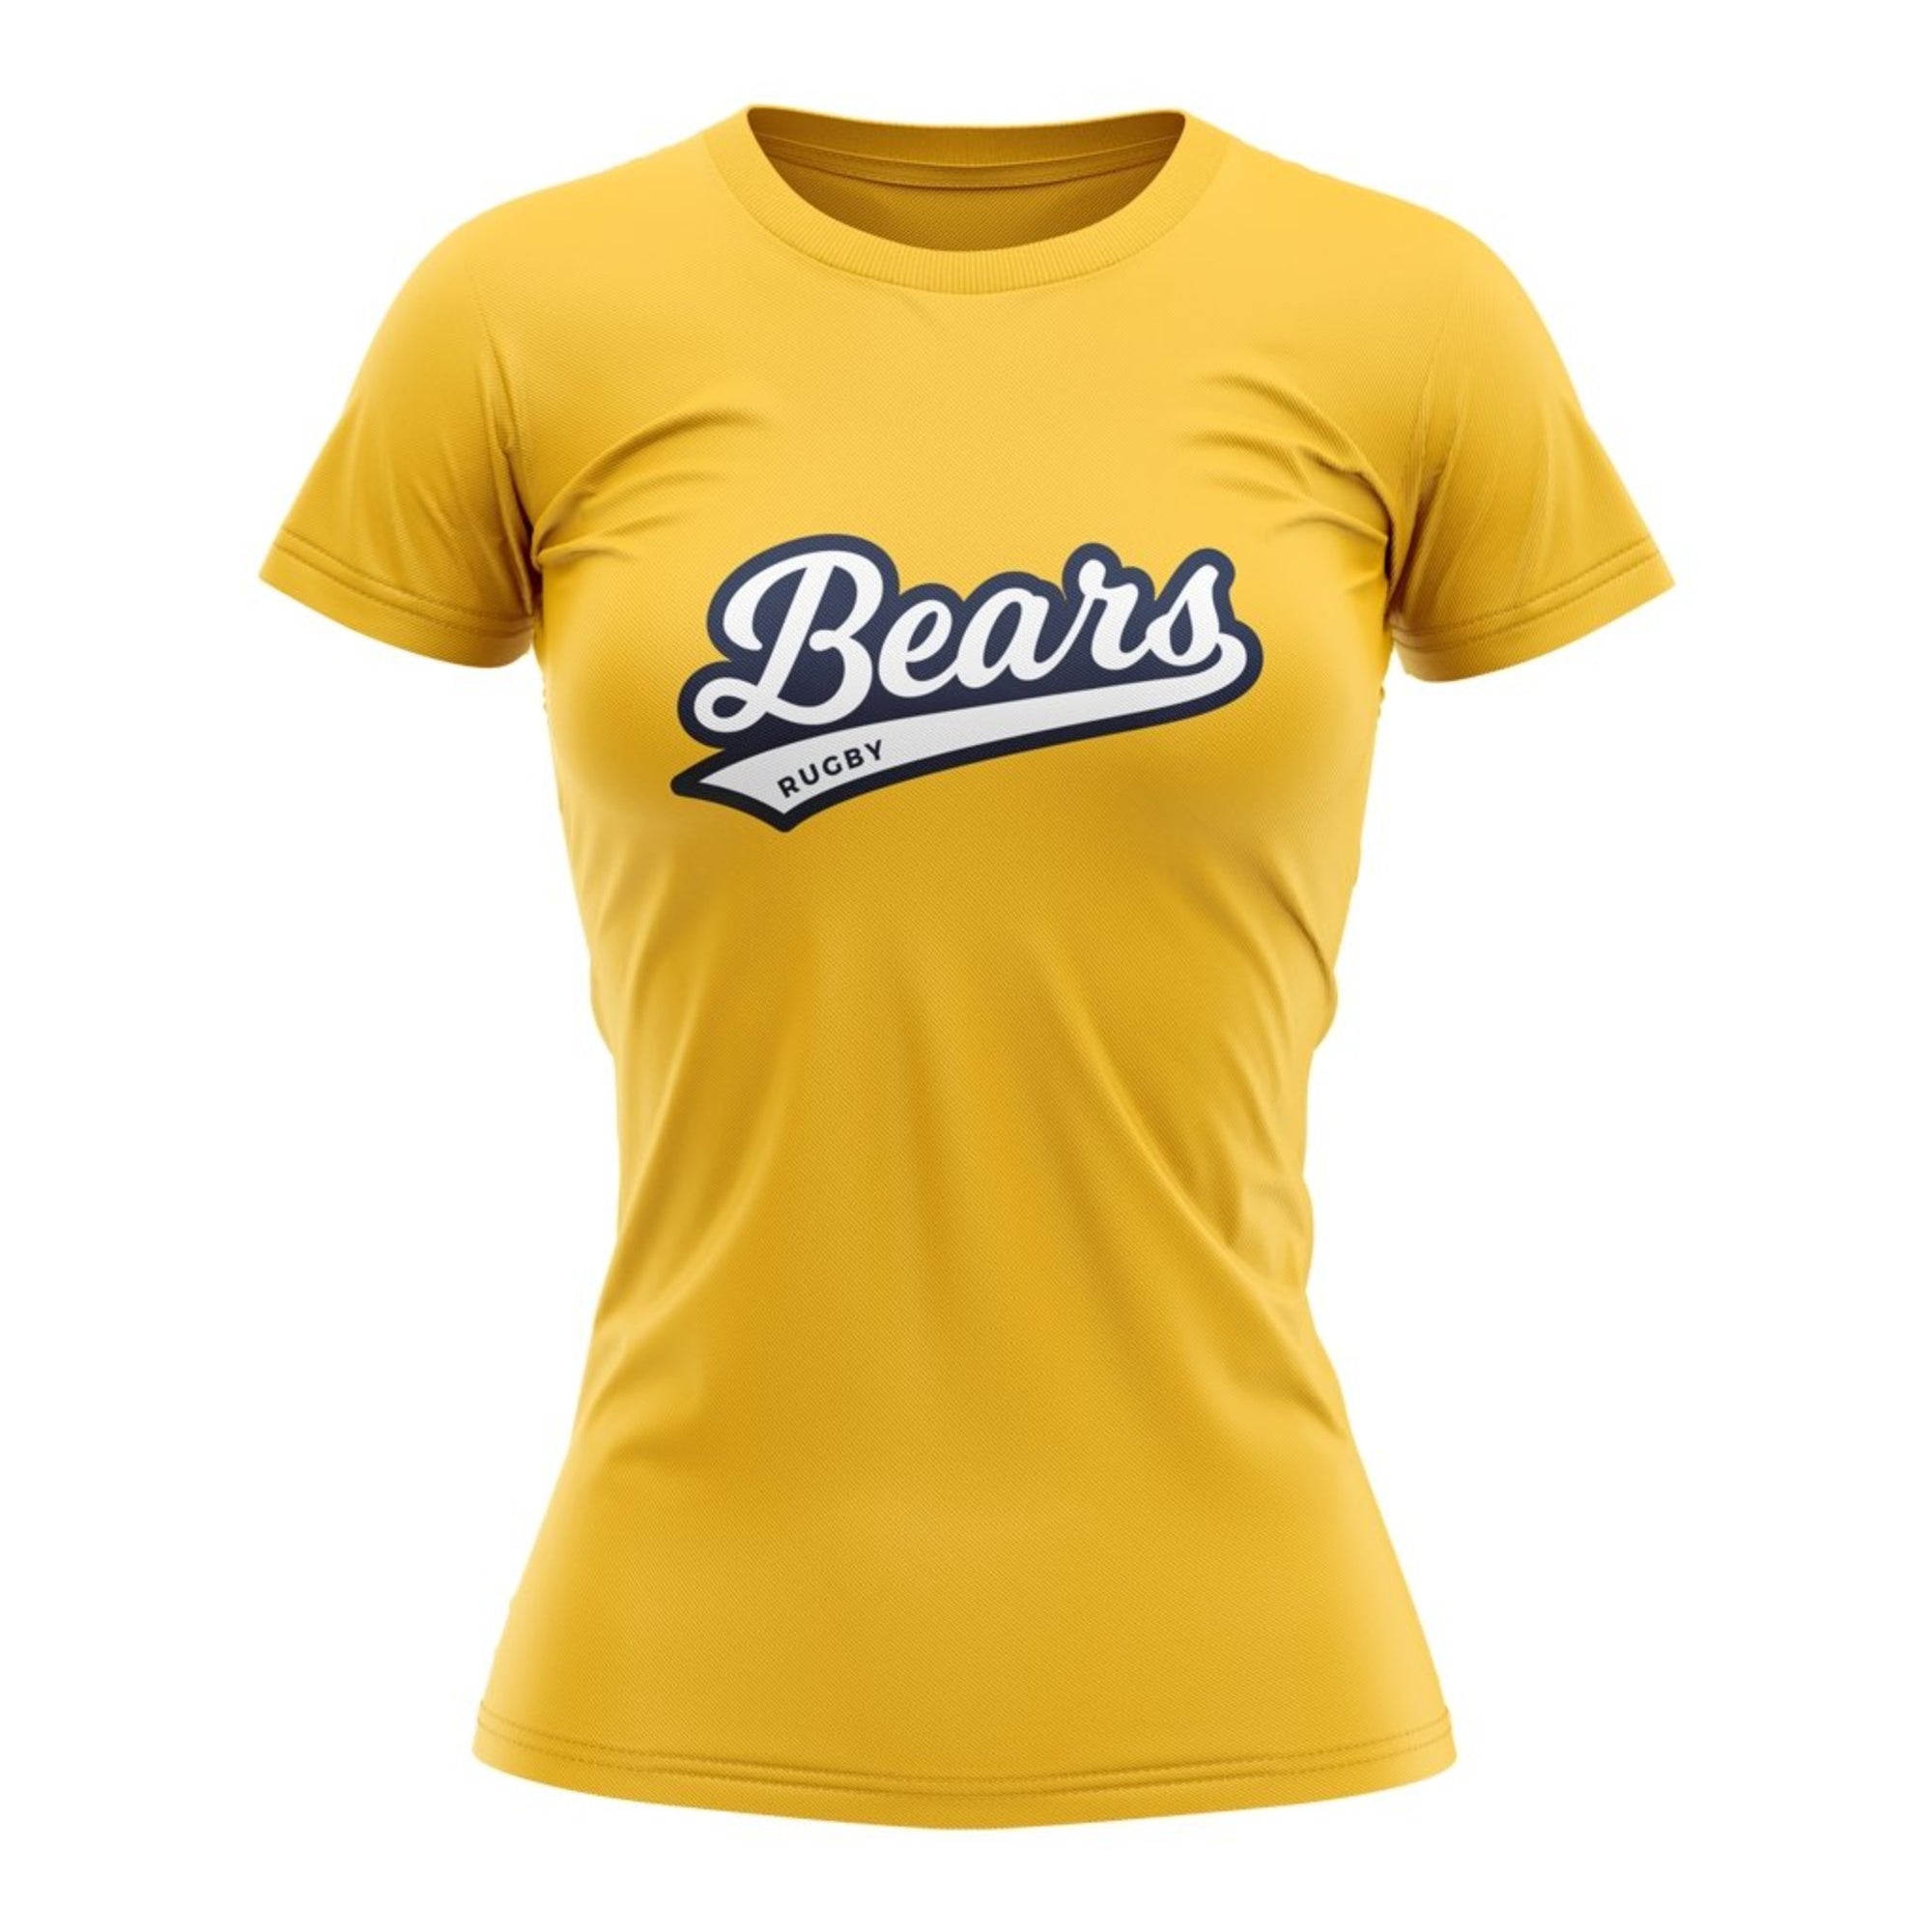 BC Rugby 2021 "Bears" Tee - Women's White/Gold - www.therugbyshop.com www.therugbyshop.com WOMENS / WHITE / XS XIX Brands TEES BC Rugby 2021 "Bears" Tee - Women's White/Gold